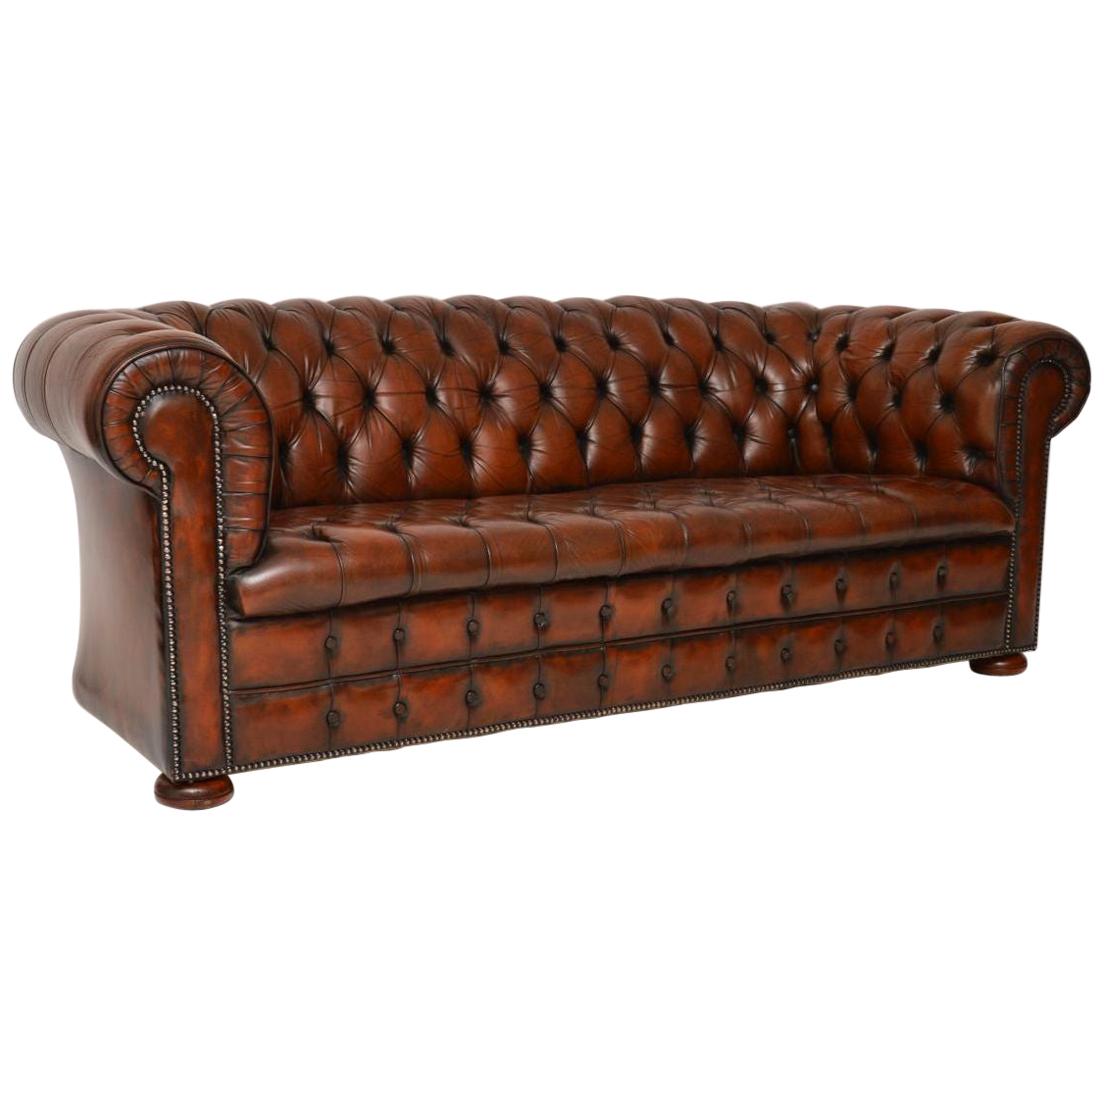 Antique Victorian Style Deep Buttoned Leather Chesterfield Sofa